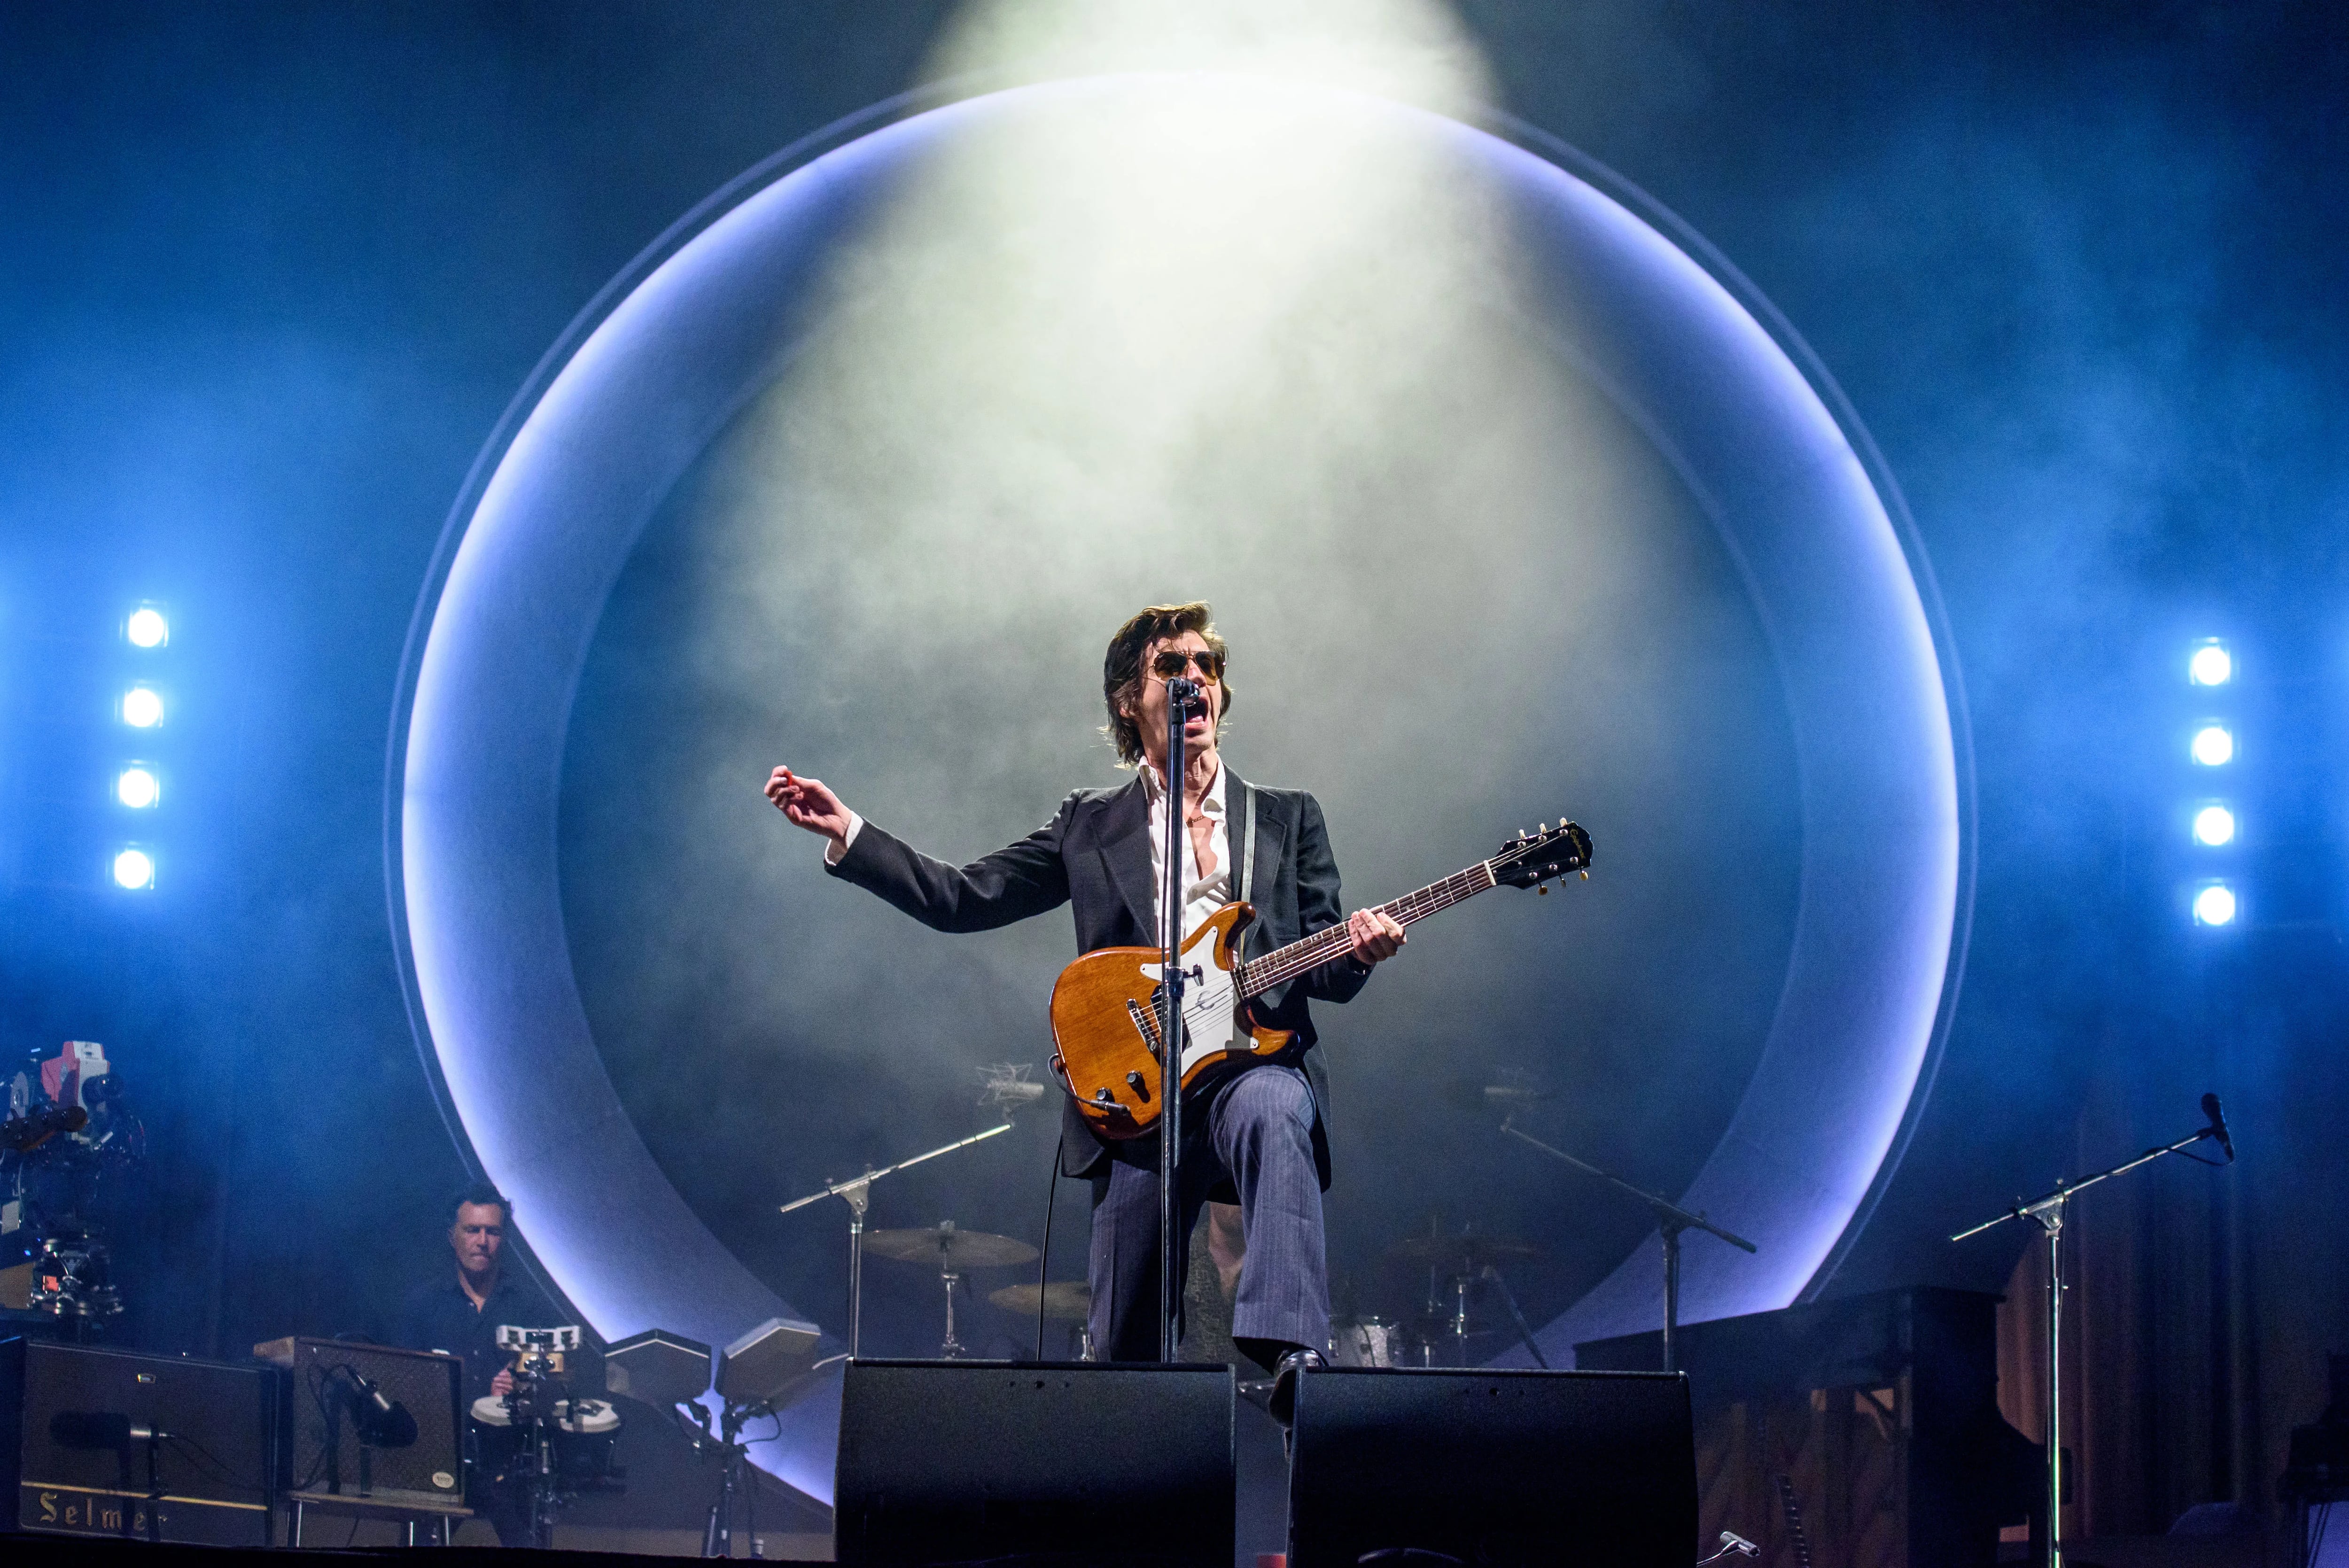 Alex Turner and company will perform on October 6 and 7 at the Foro Sol. EFE/Javier Zorrilla.